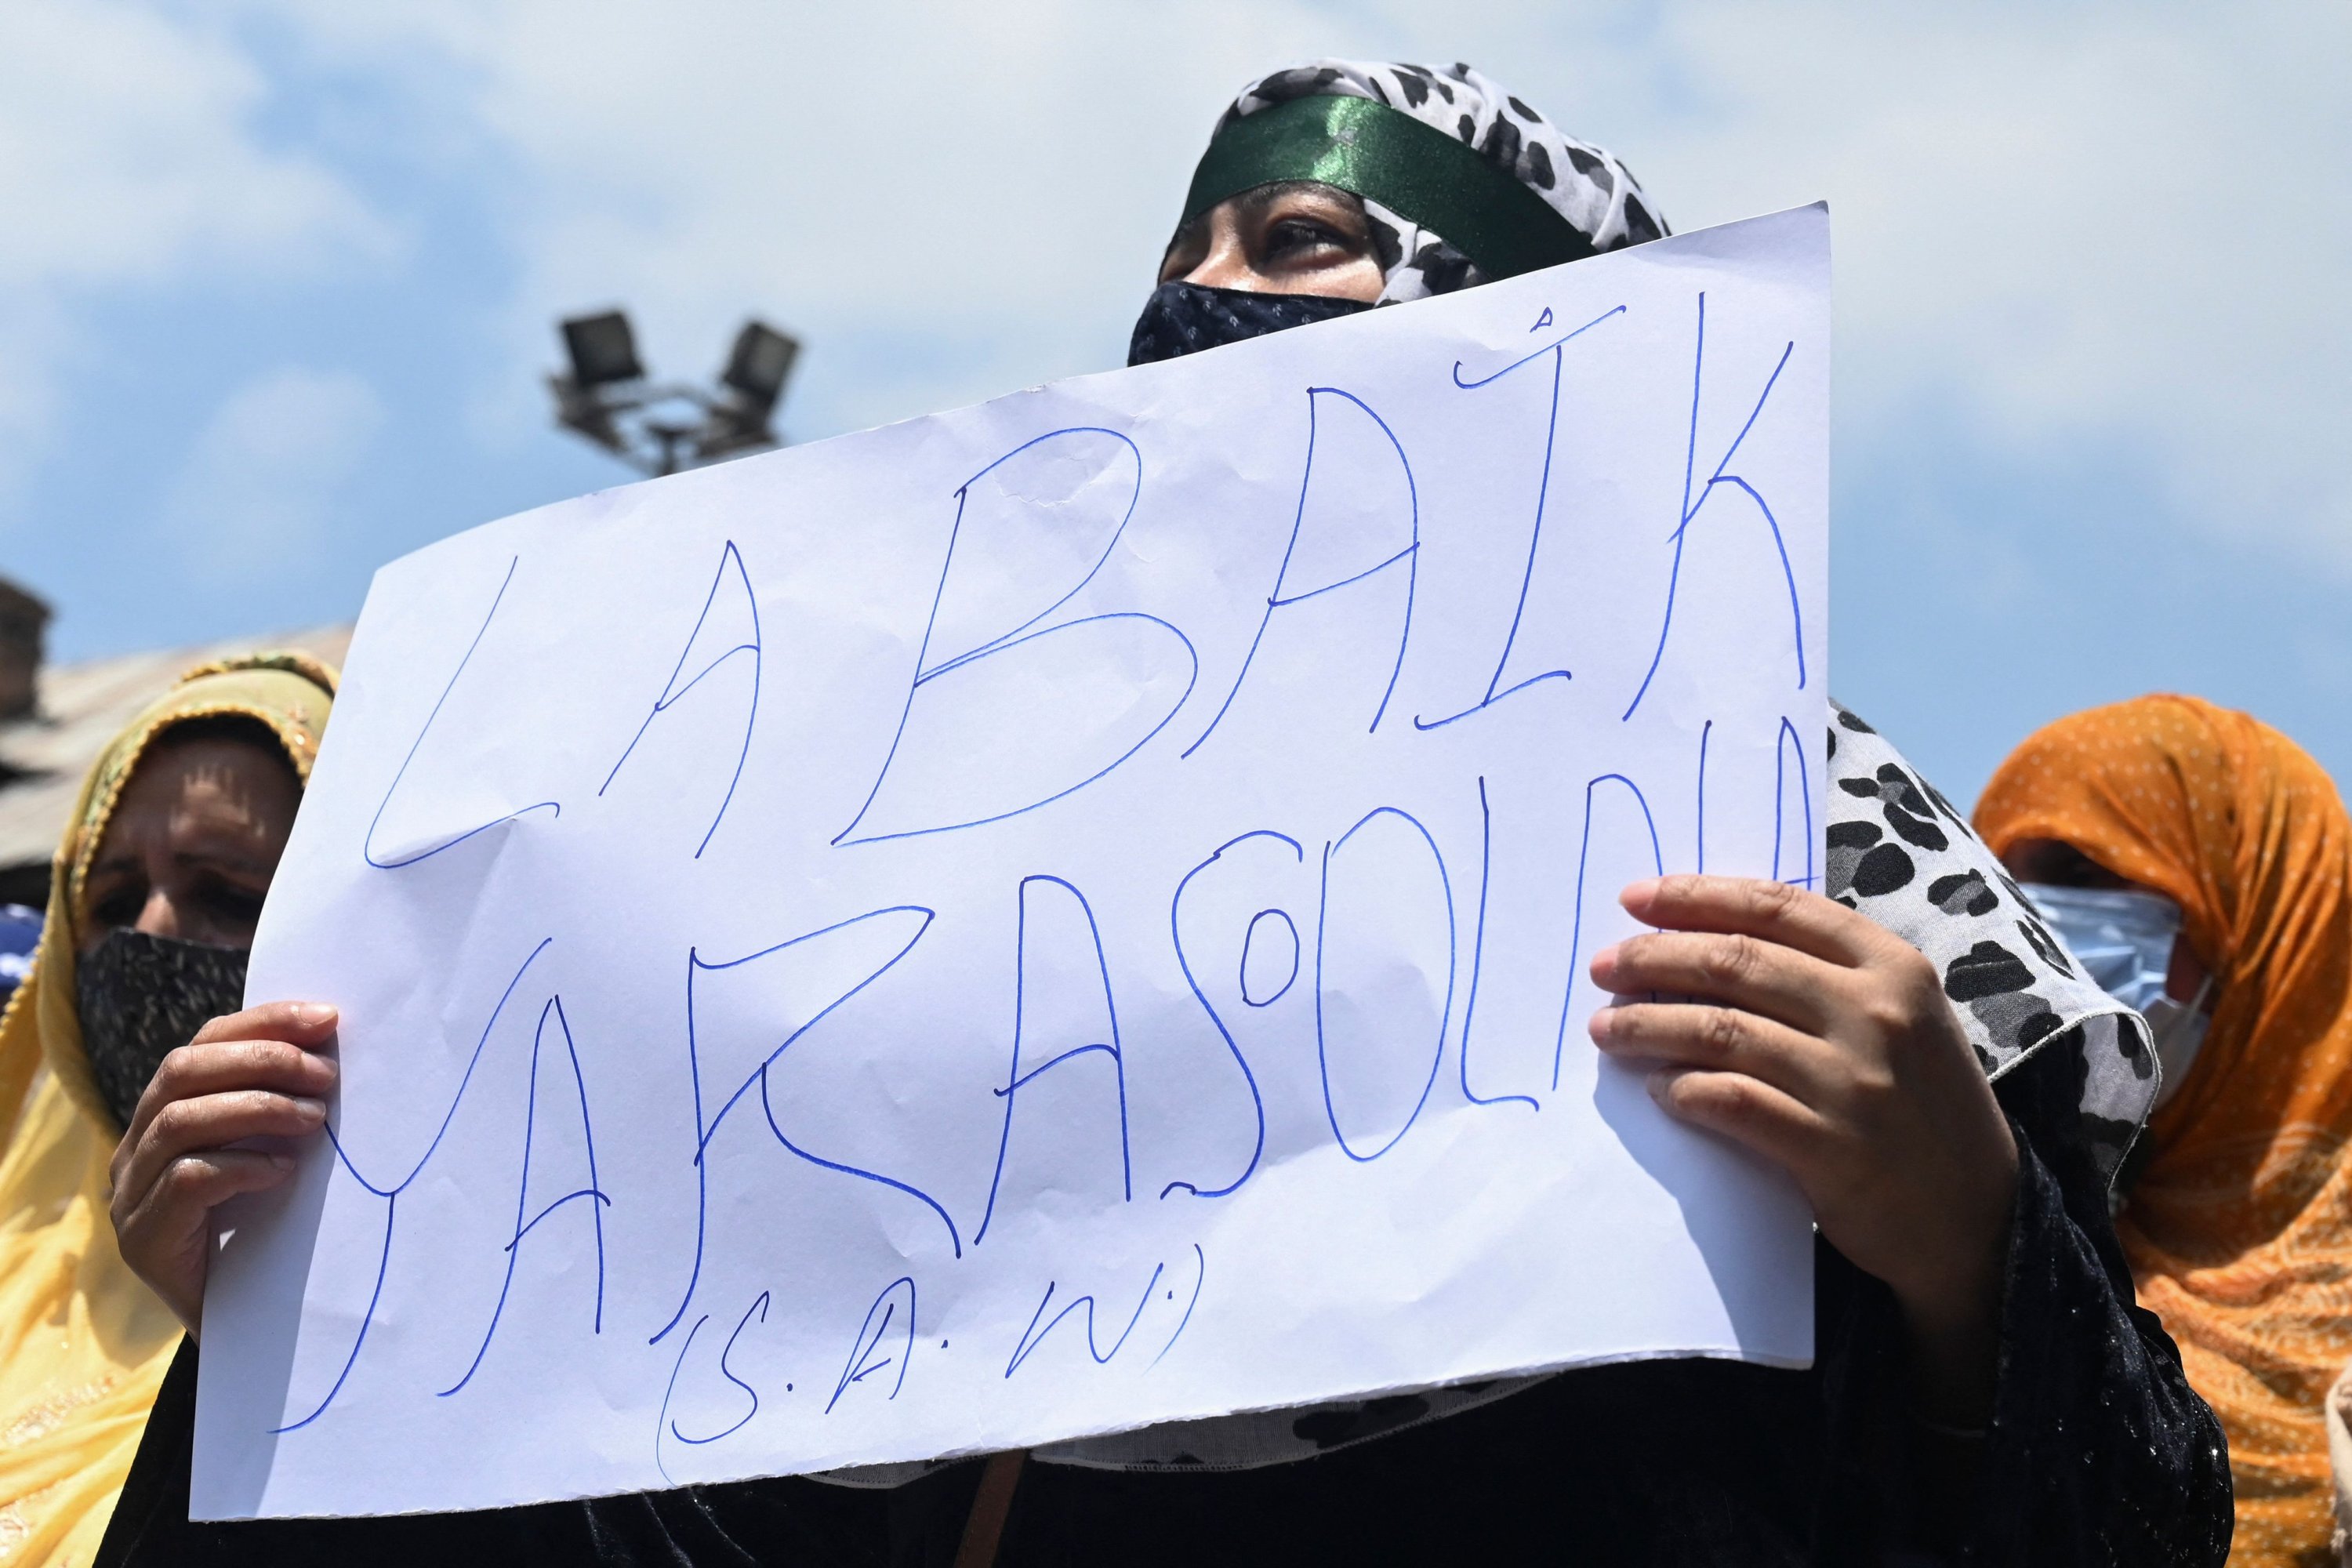 A Kashmiri woman shouts Islamic slogans and holds a placard during a protest against India's Bharatiya Janata Party former spokesperson Nupur Sharma over her remarks about Prophet Muhammad, Srinagar, India-administered Kashmir, June 11, 2022. (AFP Photo)